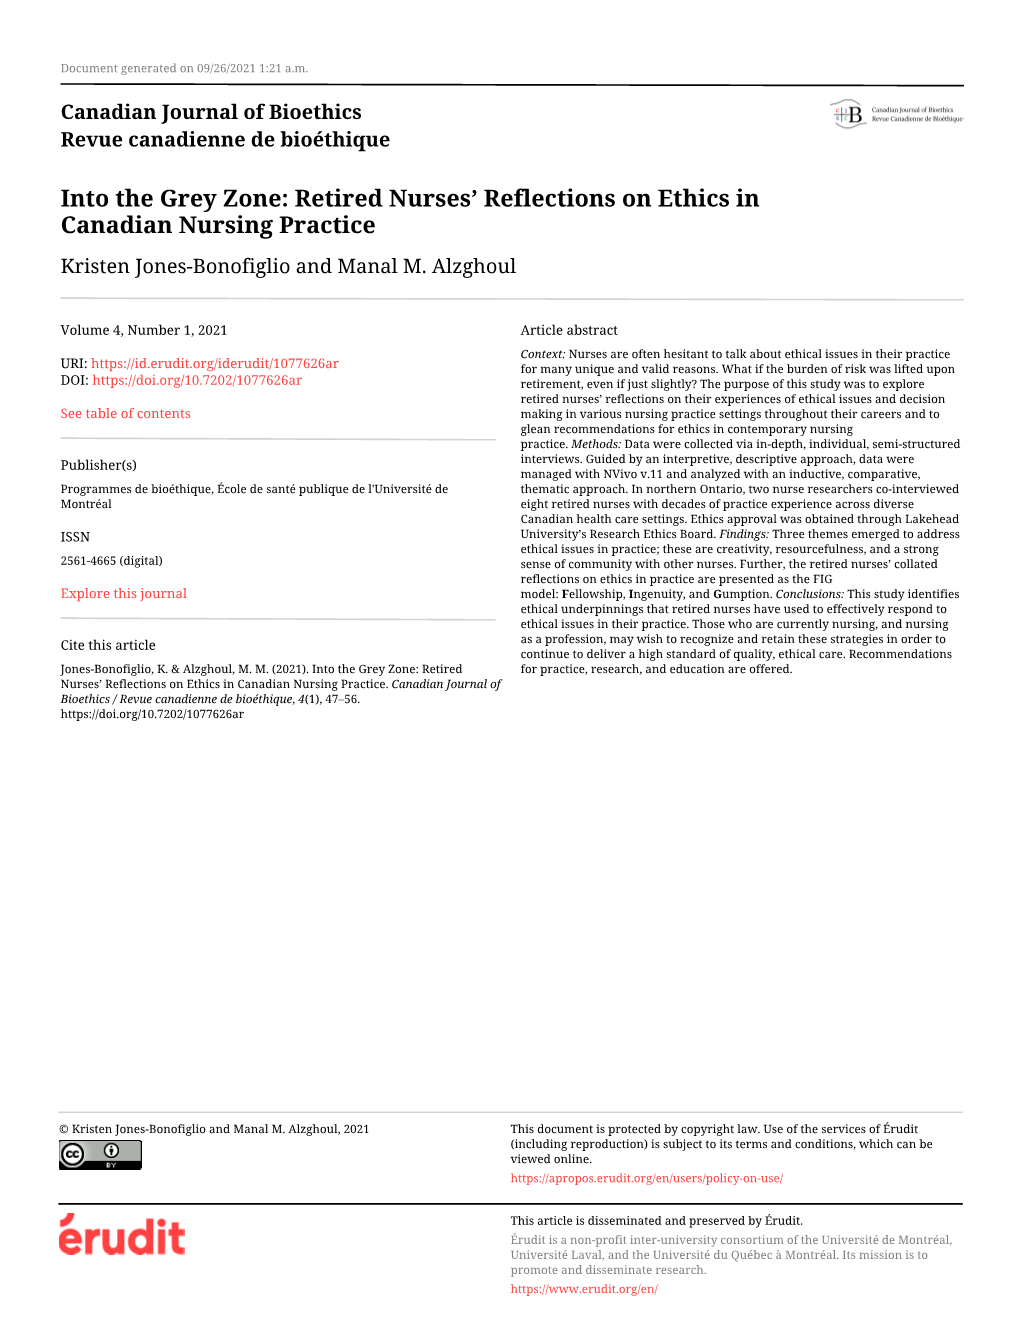 Retired Nurses' Reflections on Ethics in Canadian Nursing Practice